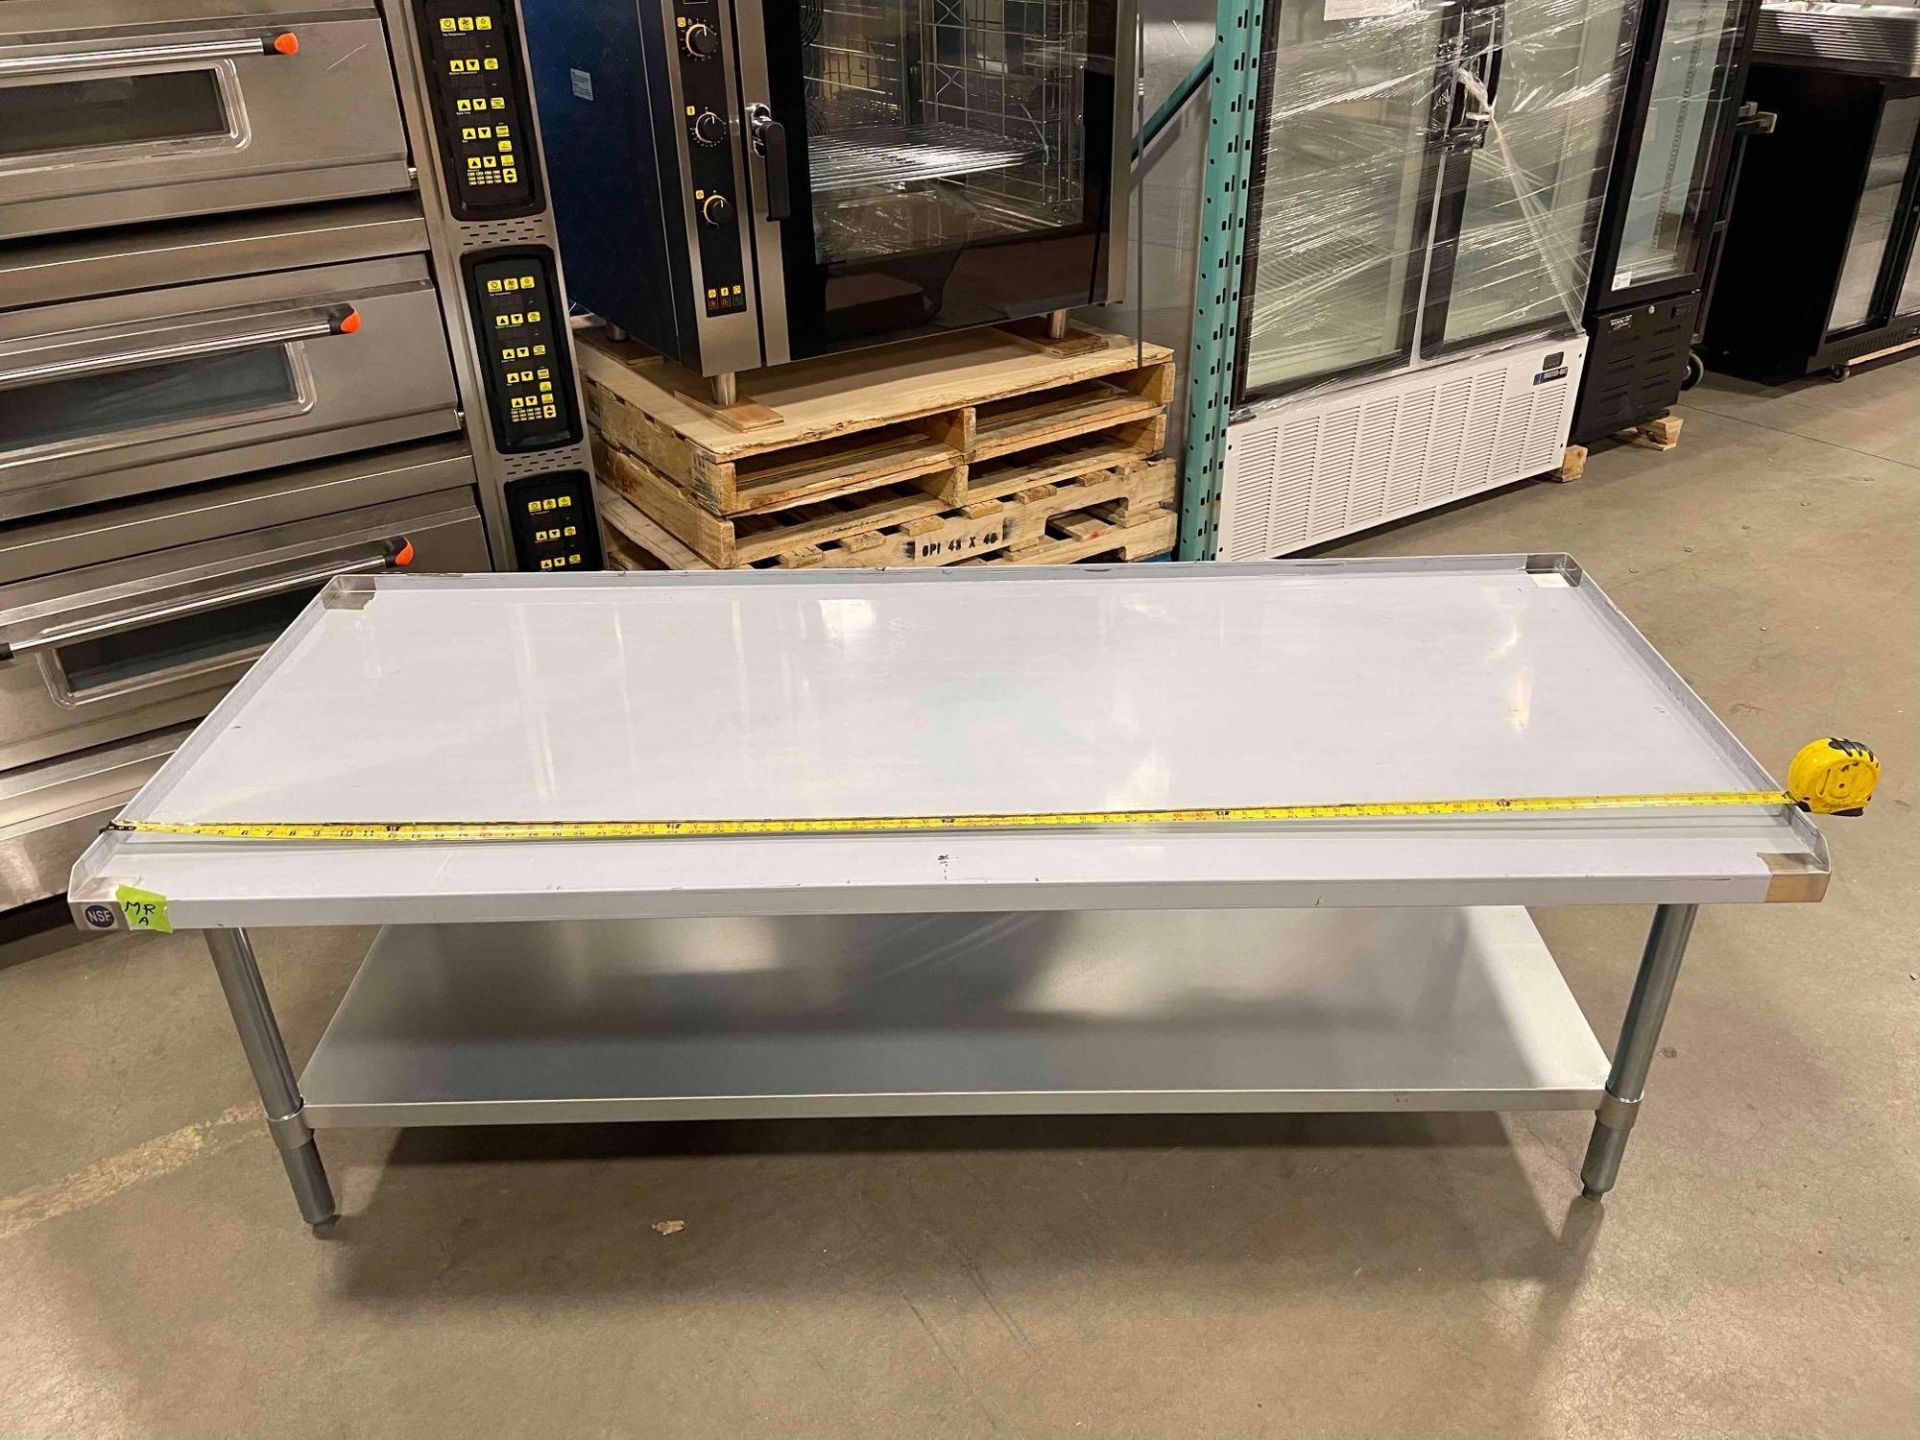 NEW 30" X 72" STAINLESS STEEL EQUIPMENT STAND WITH UNDERSHELF - Image 2 of 7